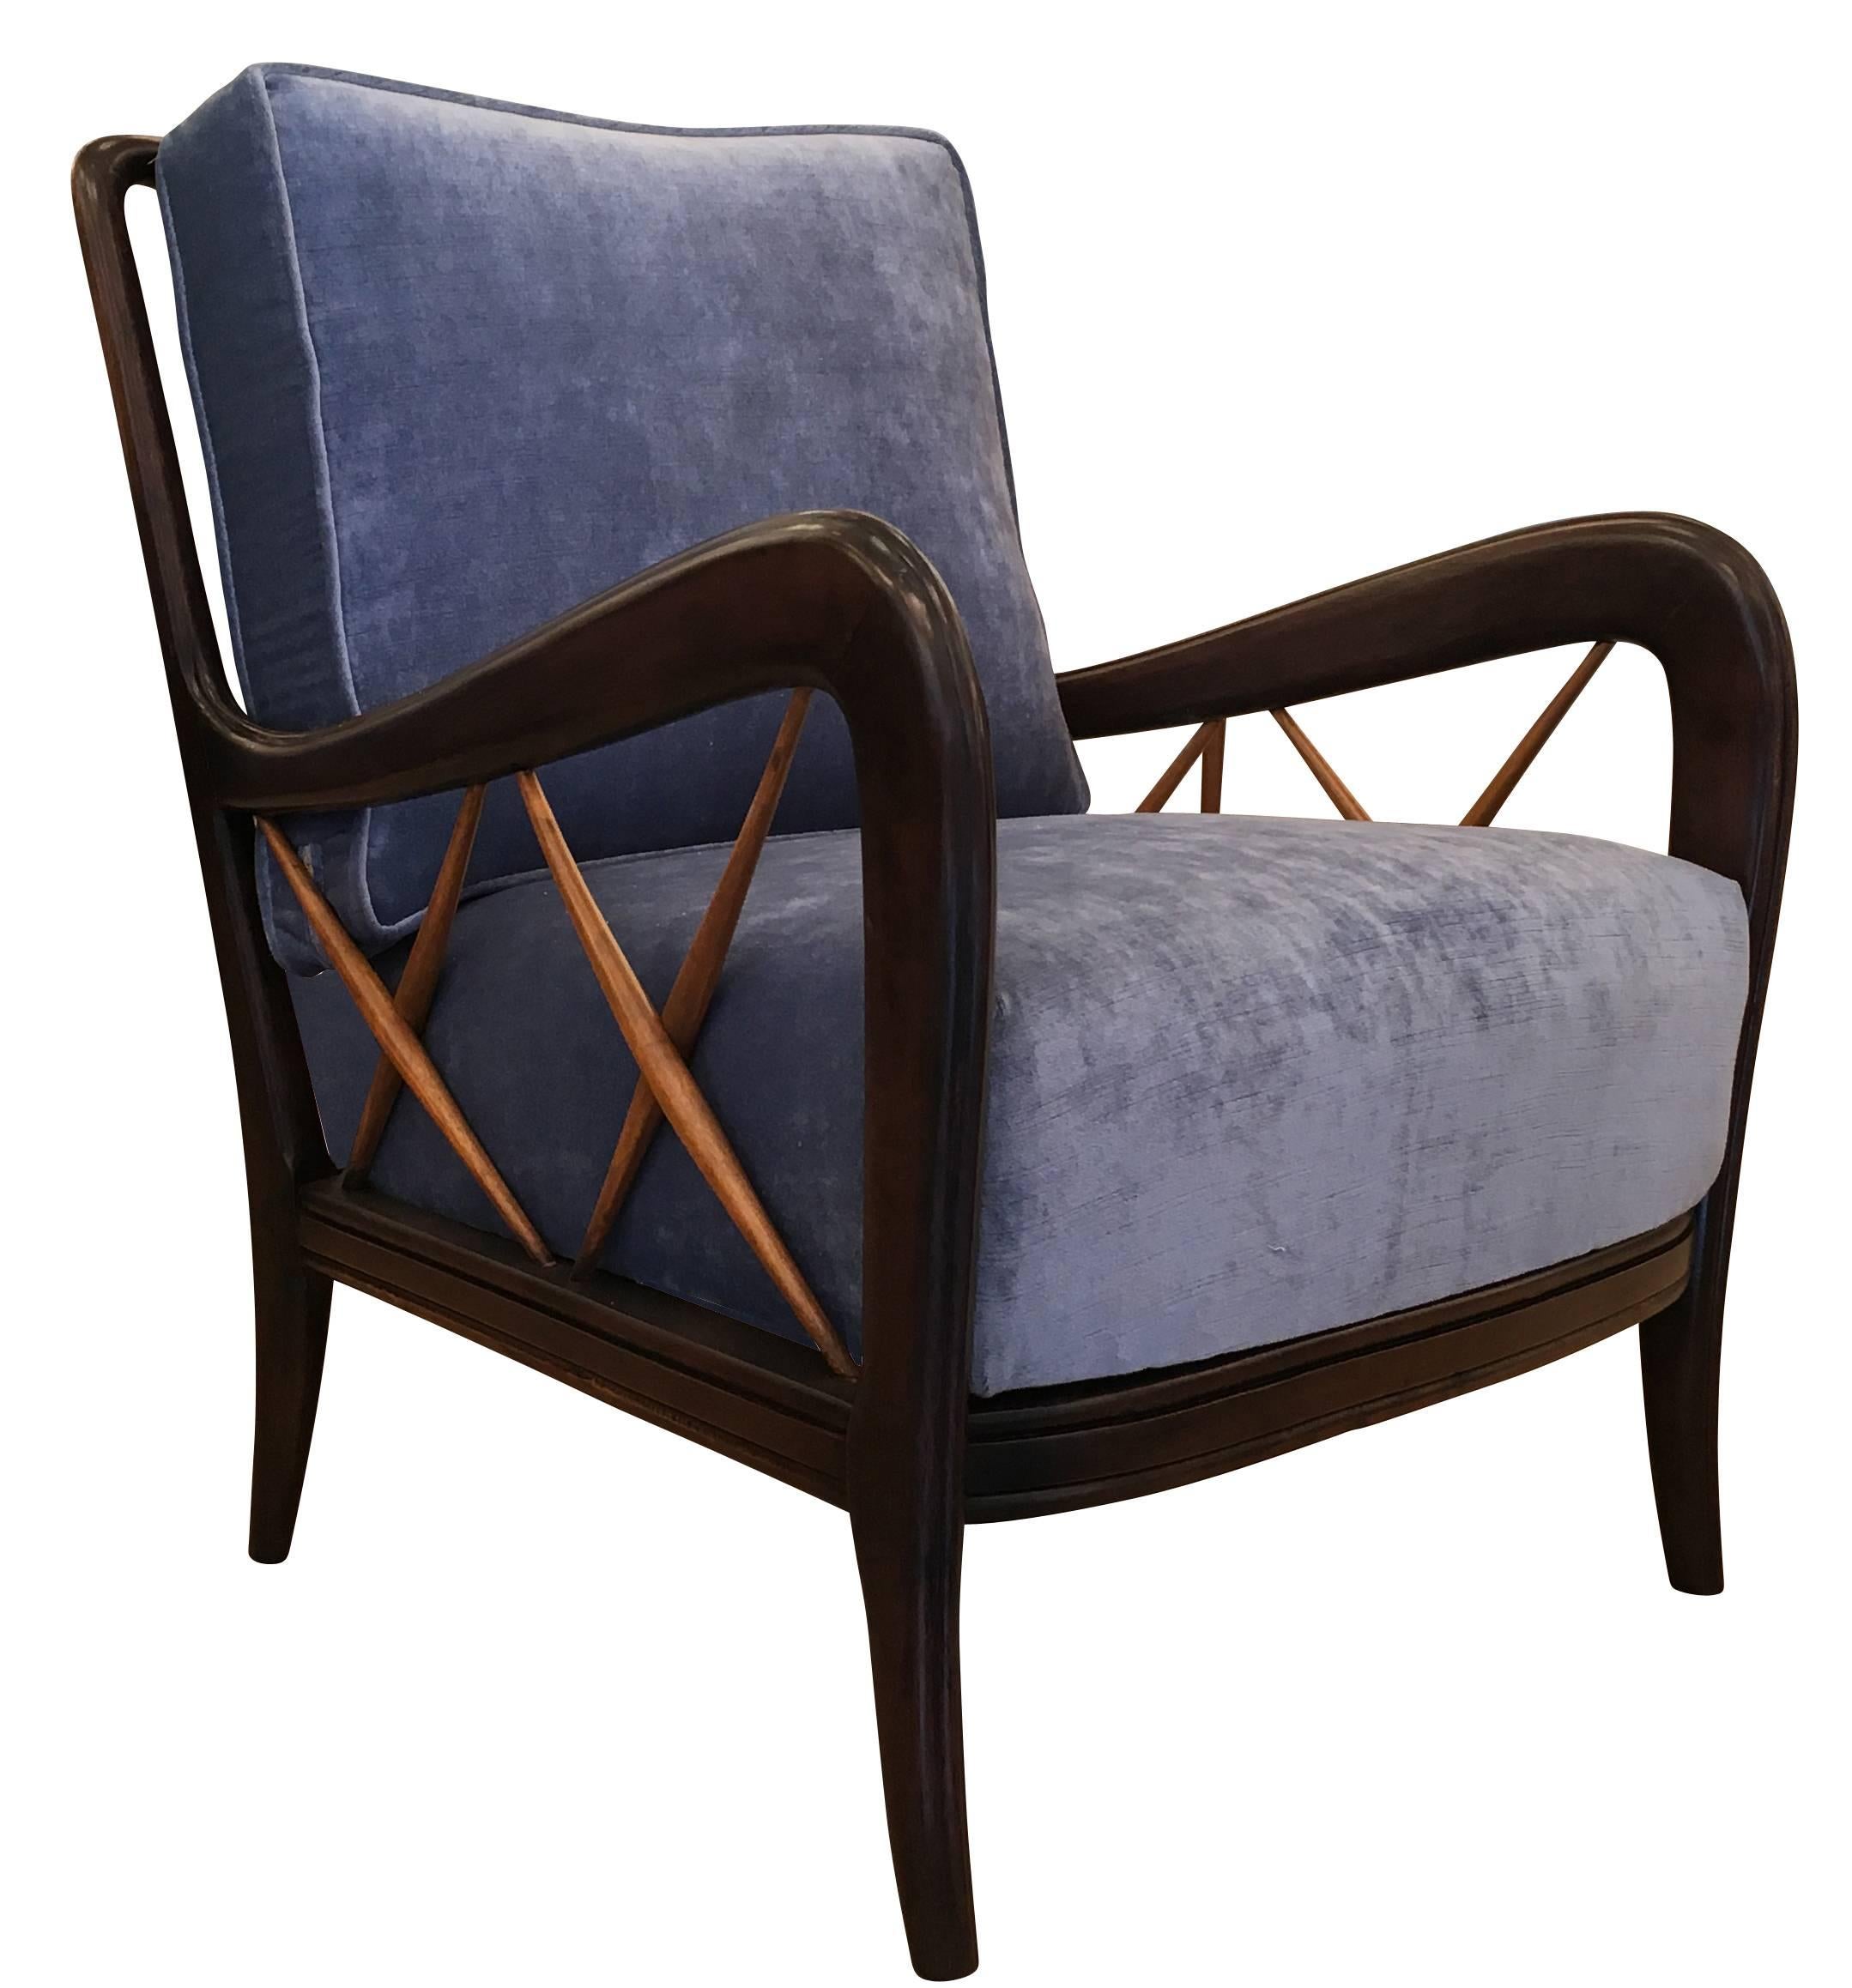 Pair of lounge chairs attributed to Paolo Buffa featuring some beautiful wood work on the sides and back. The outer part of the frame has been finished in a dark color while the 